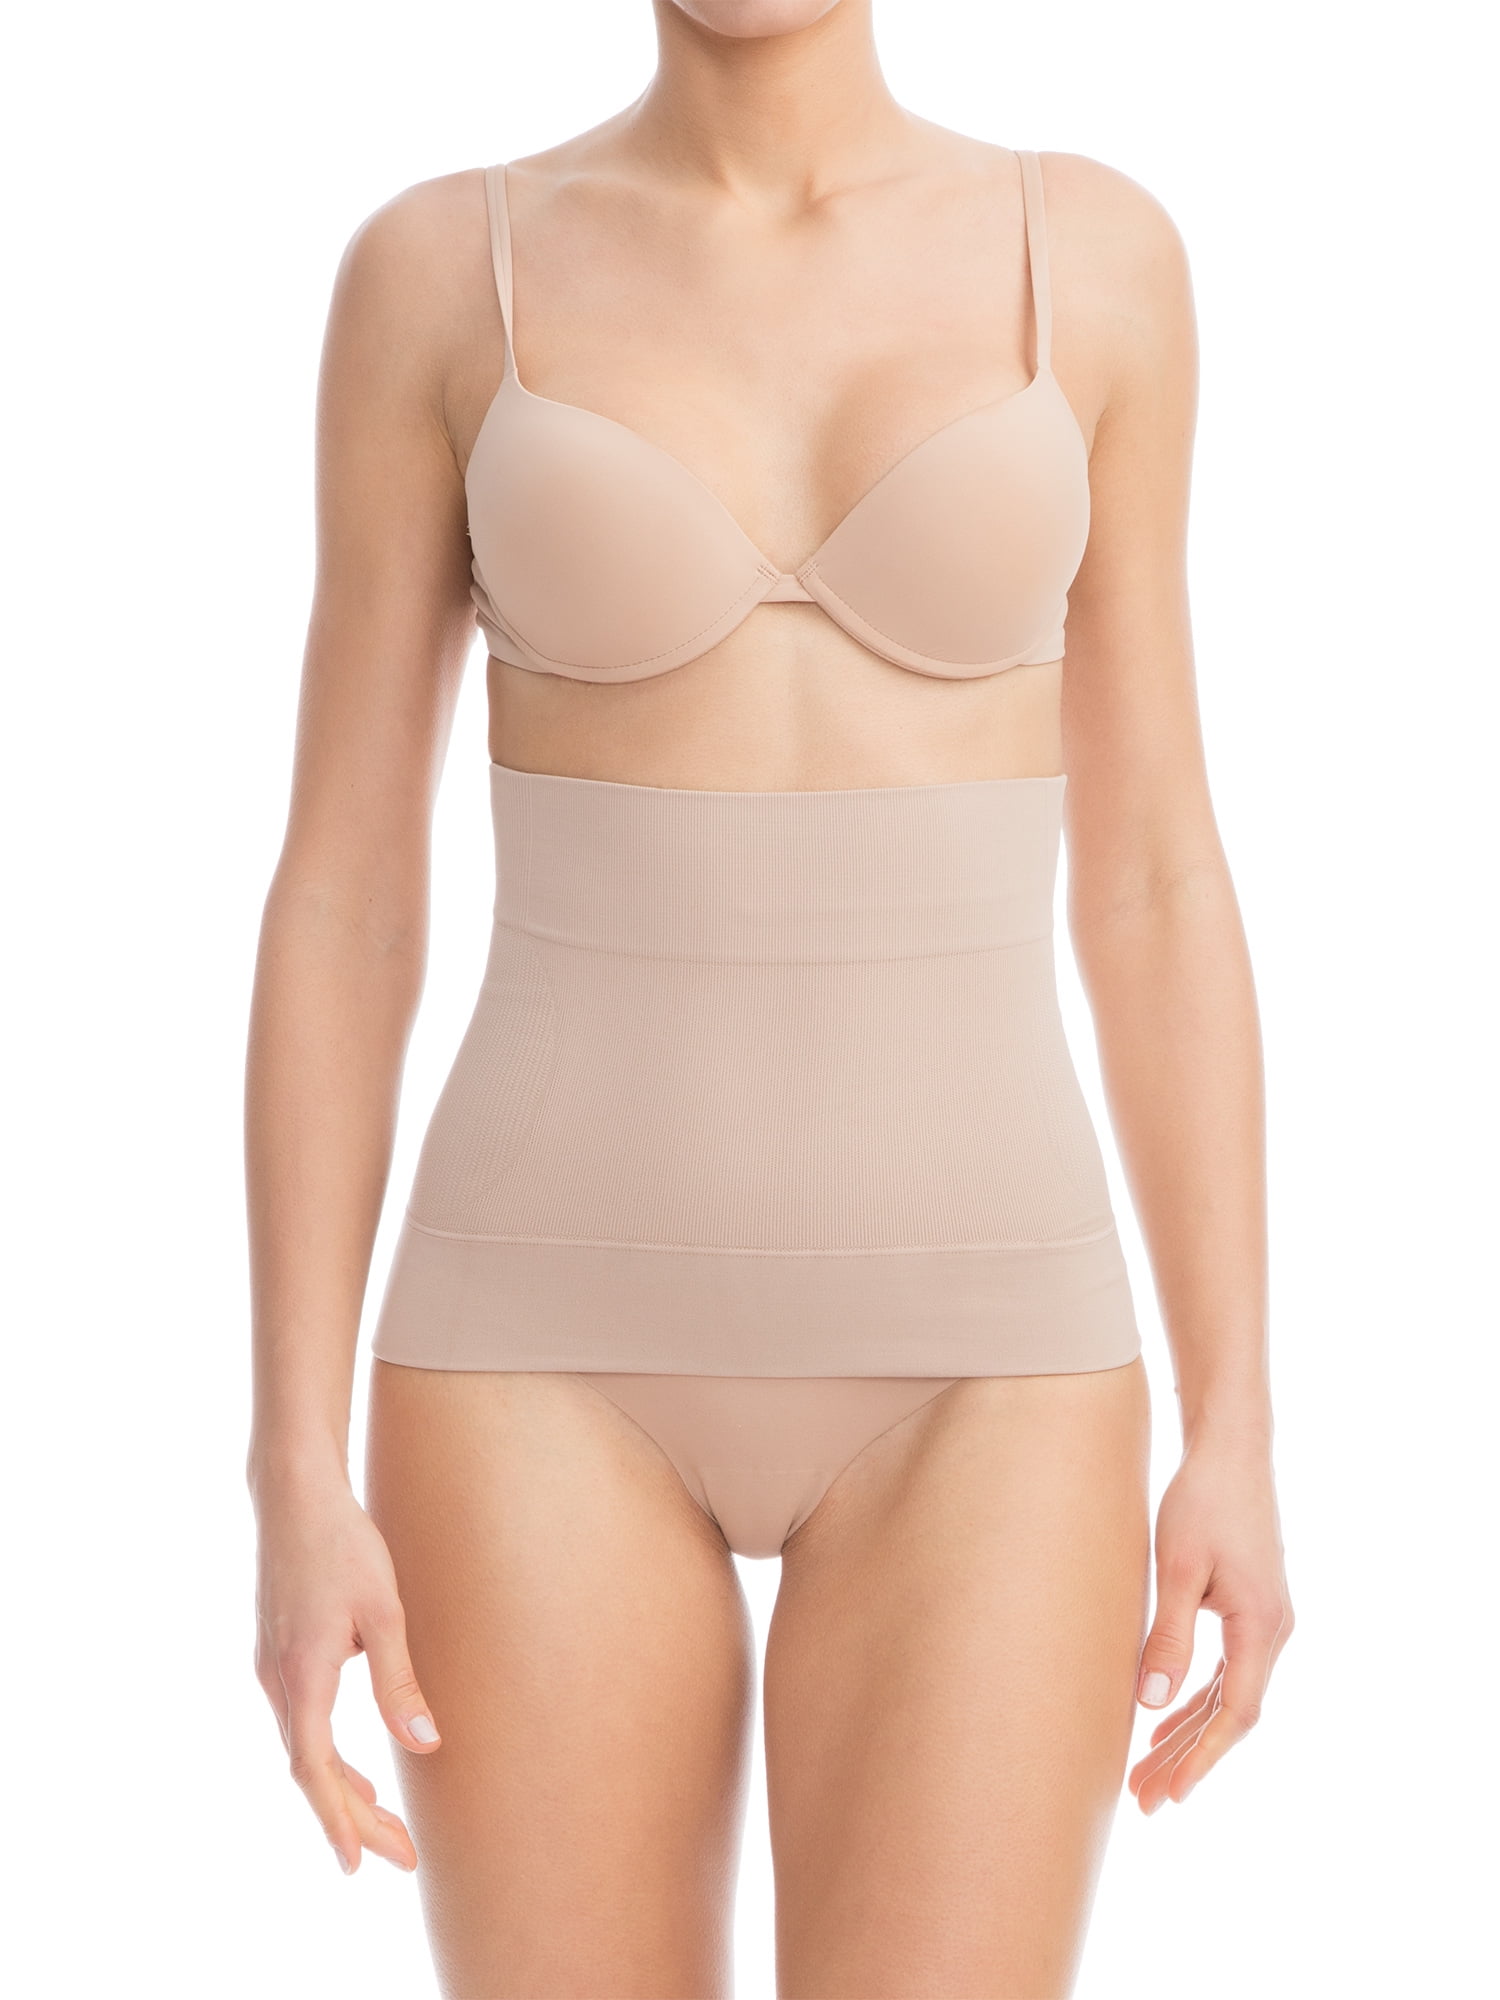 Buy Sankom Patent Lace Brief Shaper with Bamboo Fibers (XS, Gray) at ShopLC.